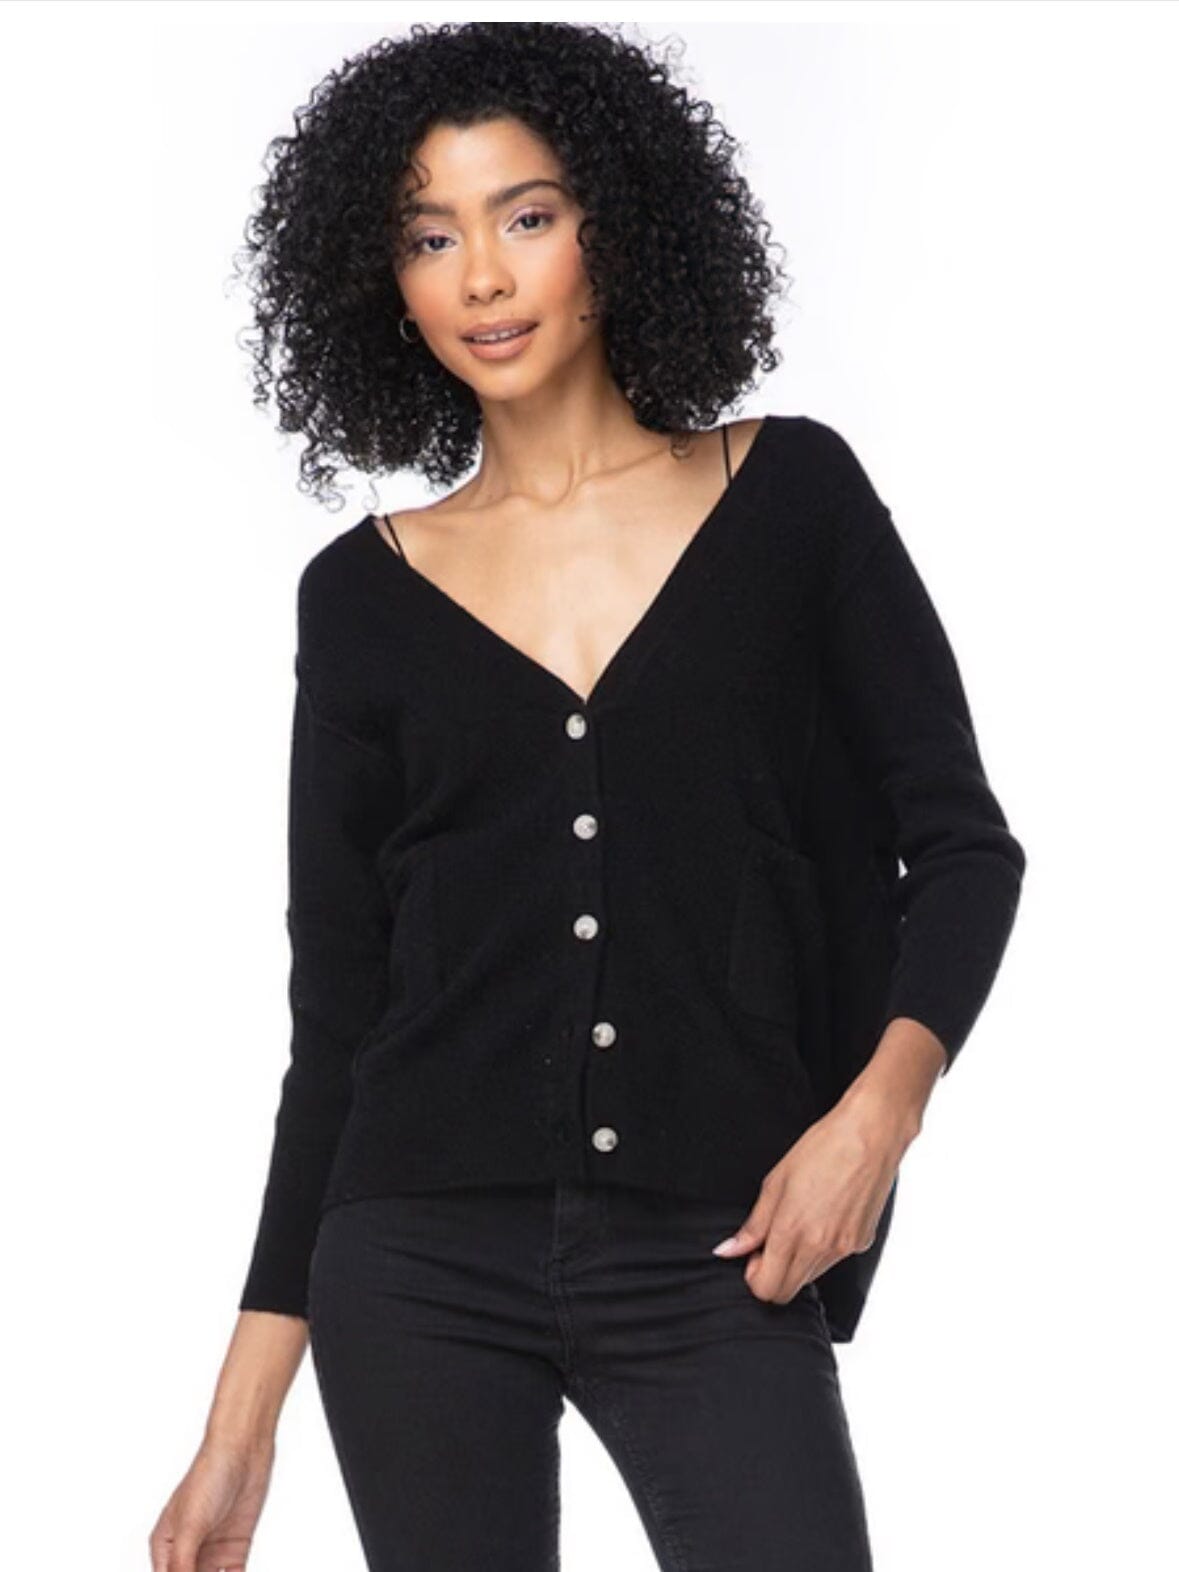 Cashmere Cardi with Pockets Tops MOM fave Black S/M 